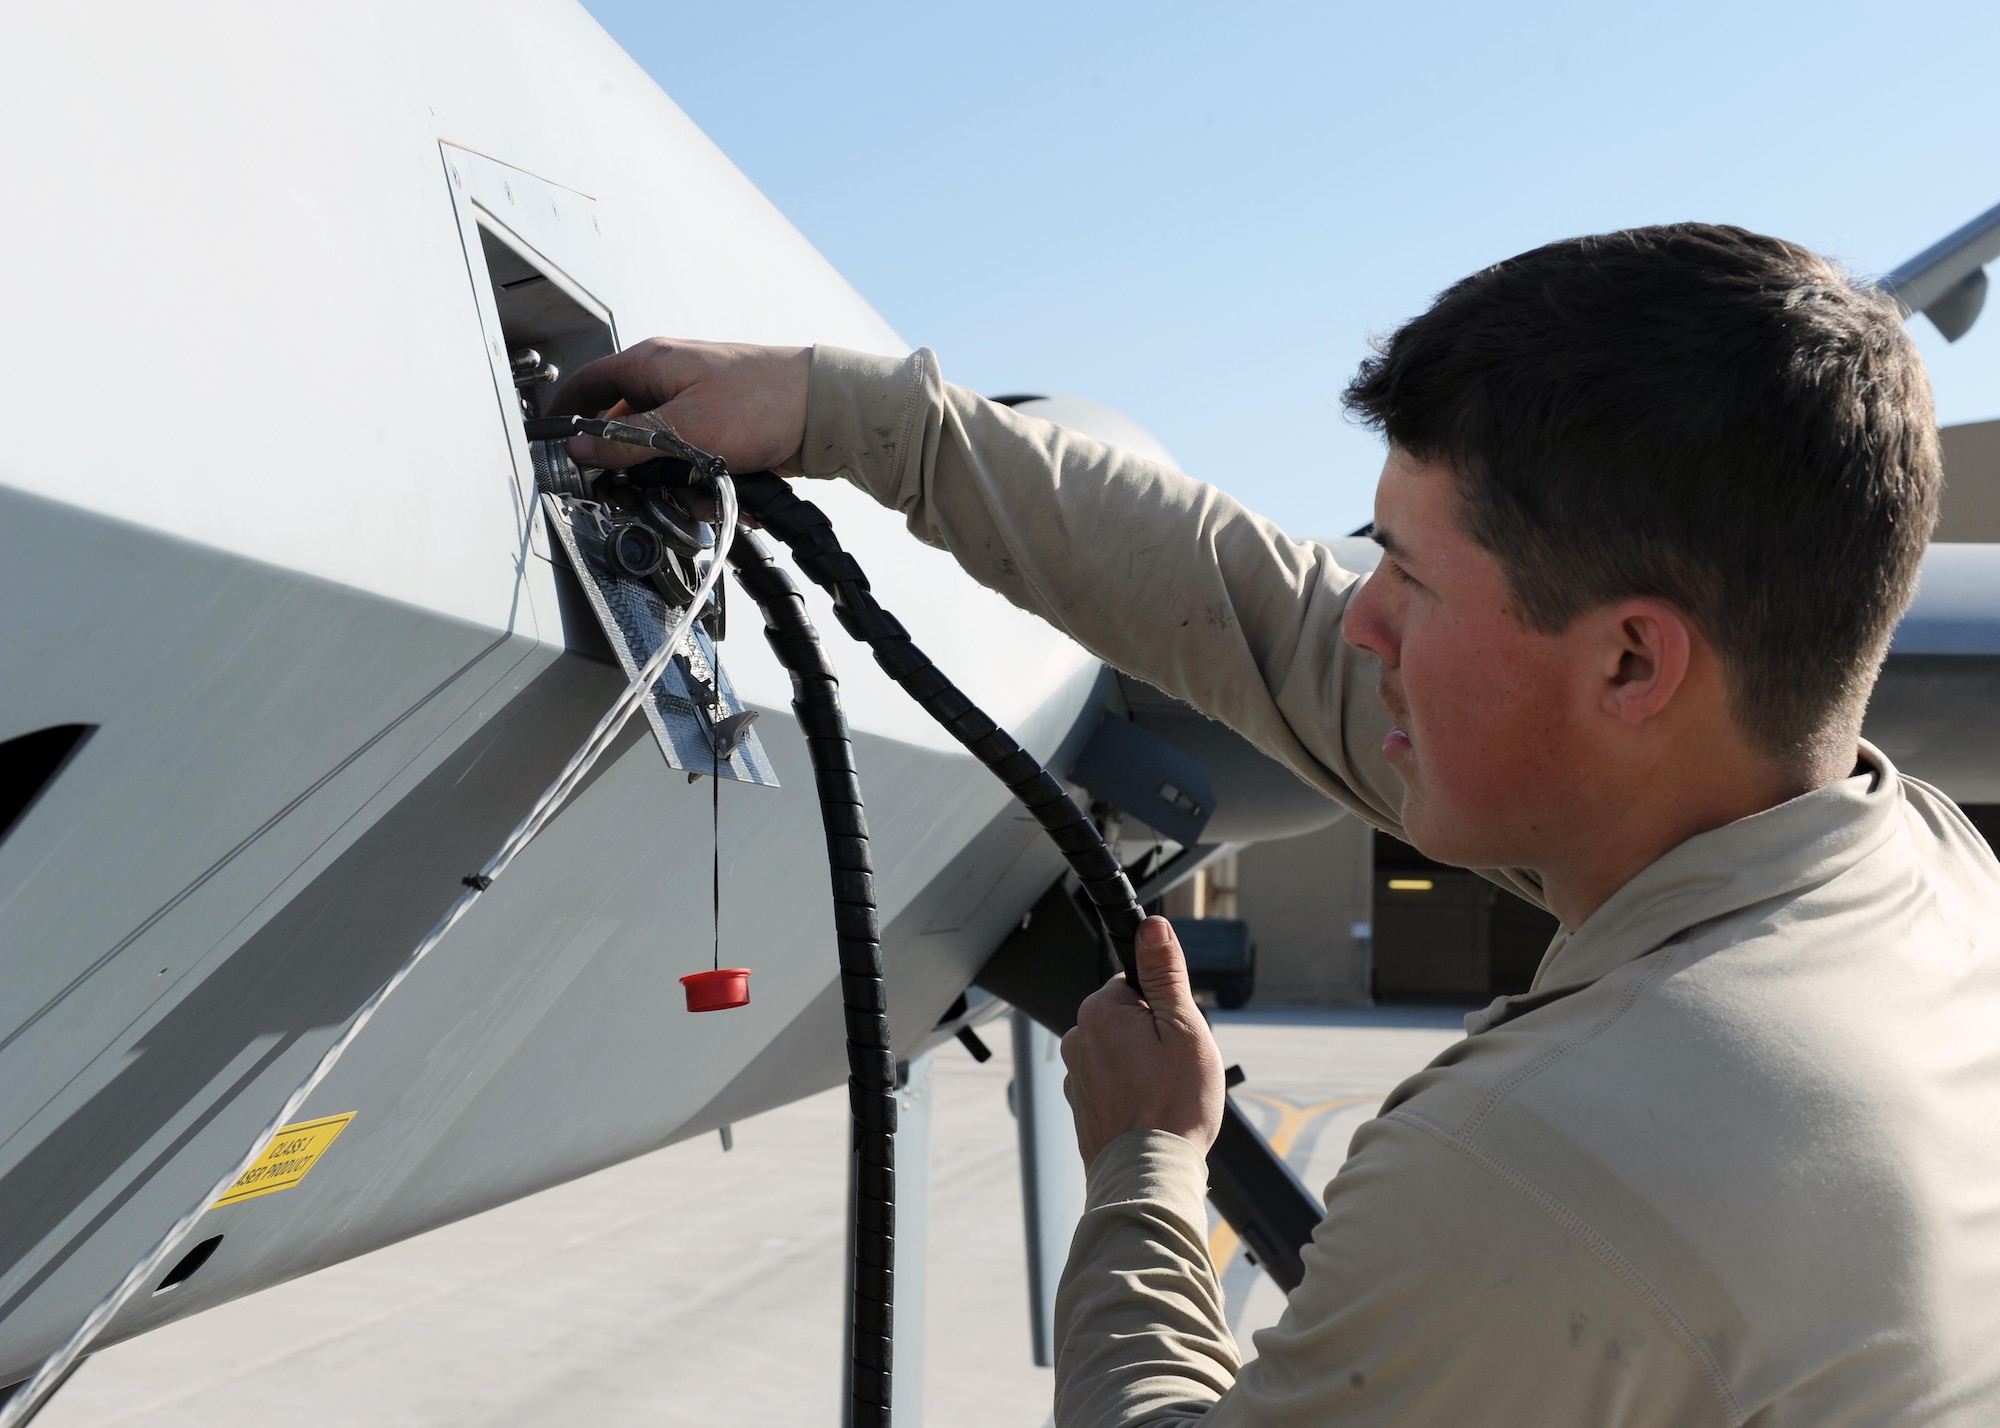 A 451st Expeditionary Aircraft Maintenance Squadron Airman performs preflight checks prior to launching an MQ-9 Reaper March 20, 2015, at Kandahar Airfield, Afghanistan. Airmen assigned to the 451st EAMXS provide 24/7 maintenance support to the Air Force’s largest Reaper unit, ensuring ground troops are supported around the clock. (U.S. Air Force photo/Staff Sgt. Whitney Amstutz)